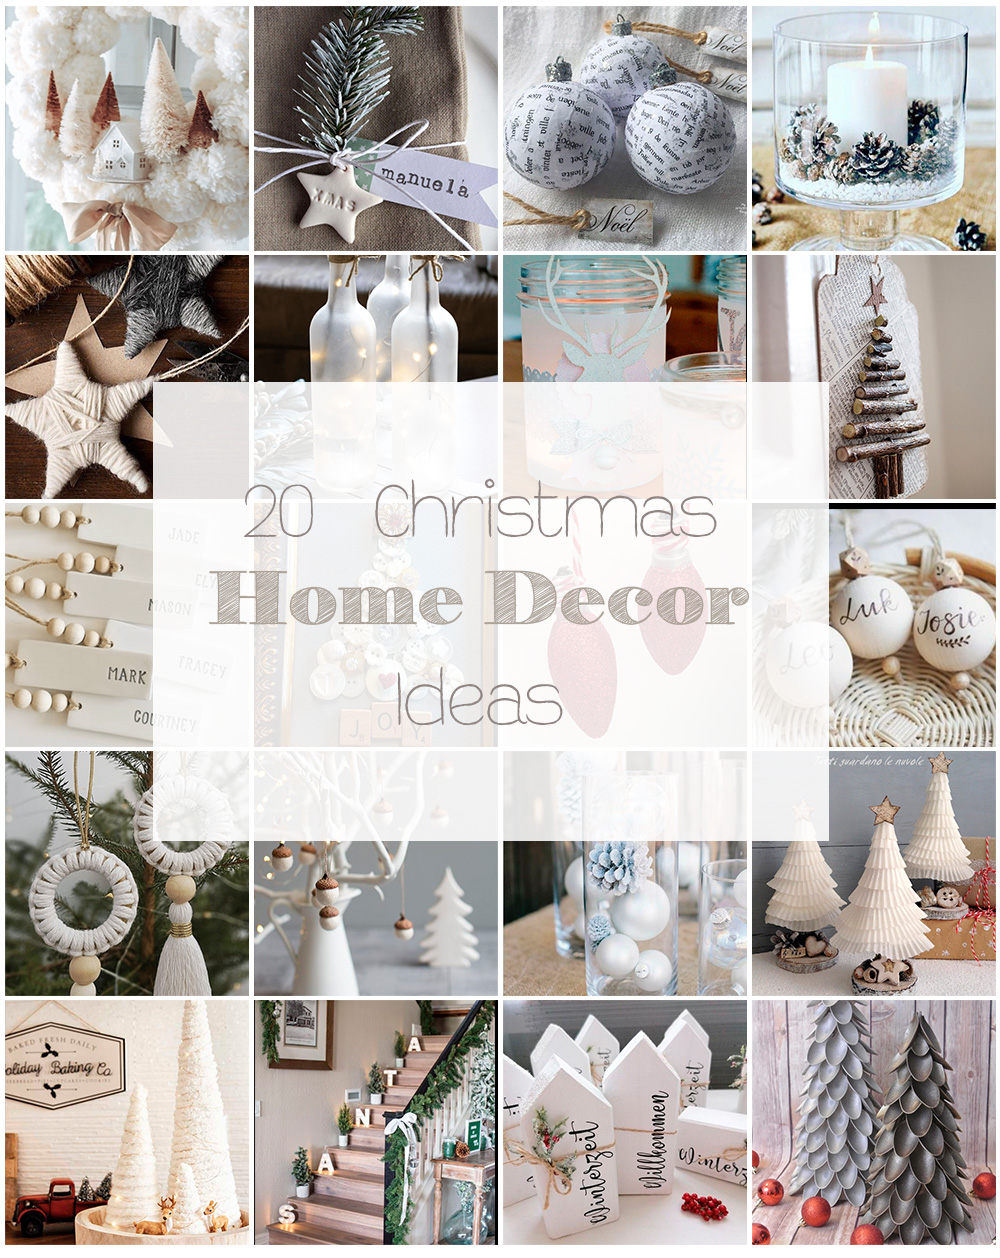 20 Christmas Decor Ideas For the Home • My Sweet Things